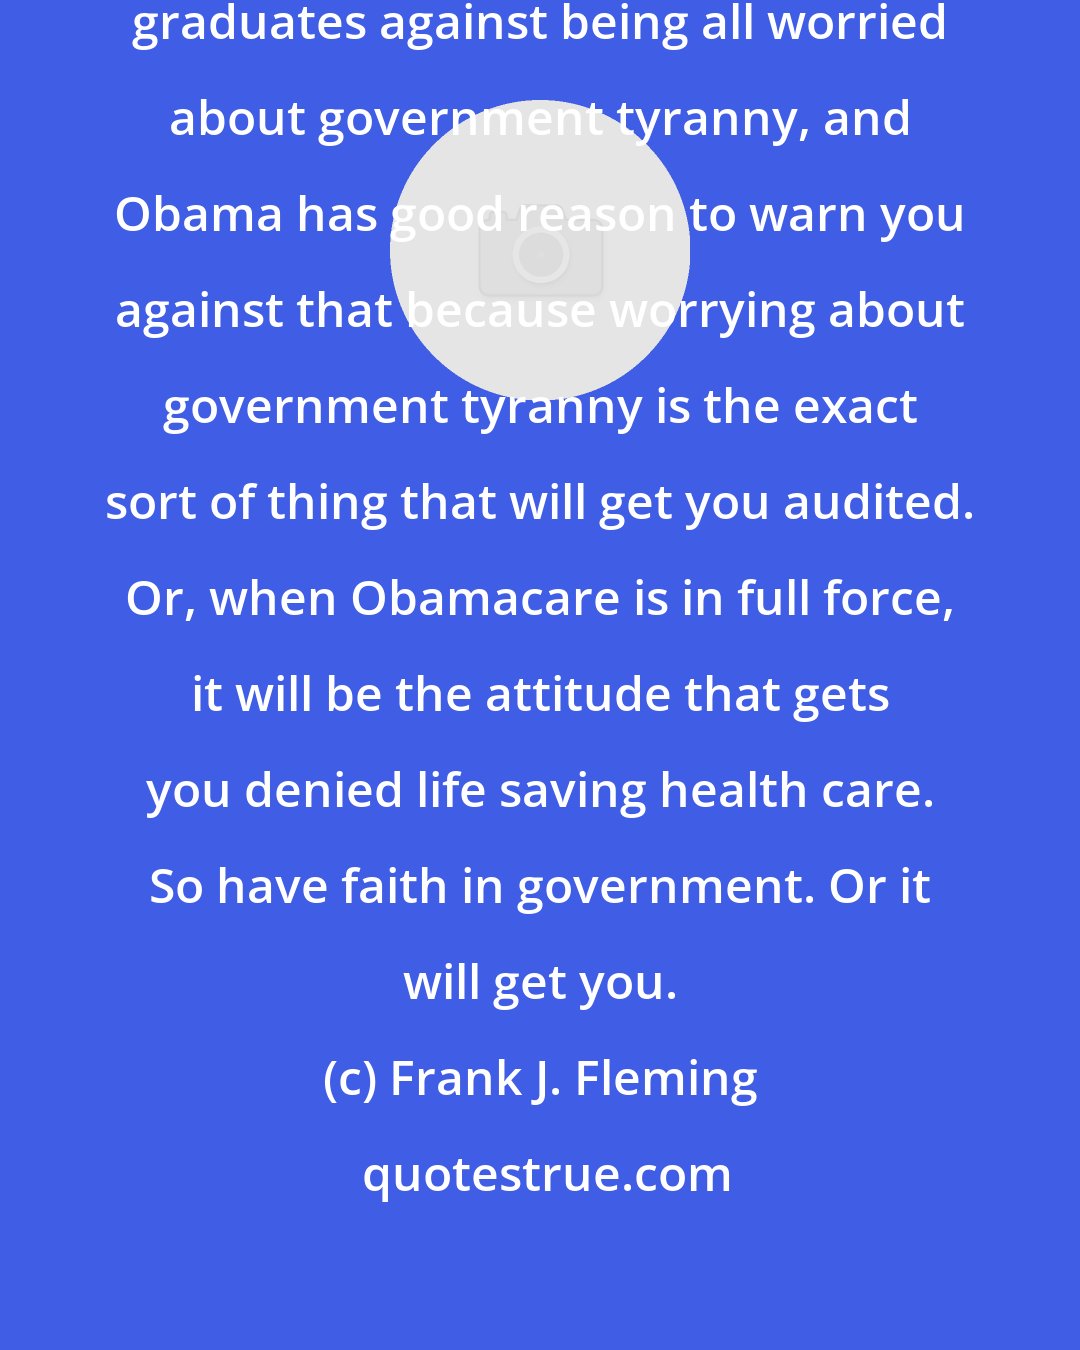 Frank J. Fleming: Obama recently warned some college graduates against being all worried about government tyranny, and Obama has good reason to warn you against that because worrying about government tyranny is the exact sort of thing that will get you audited. Or, when Obamacare is in full force, it will be the attitude that gets you denied life saving health care. So have faith in government. Or it will get you.